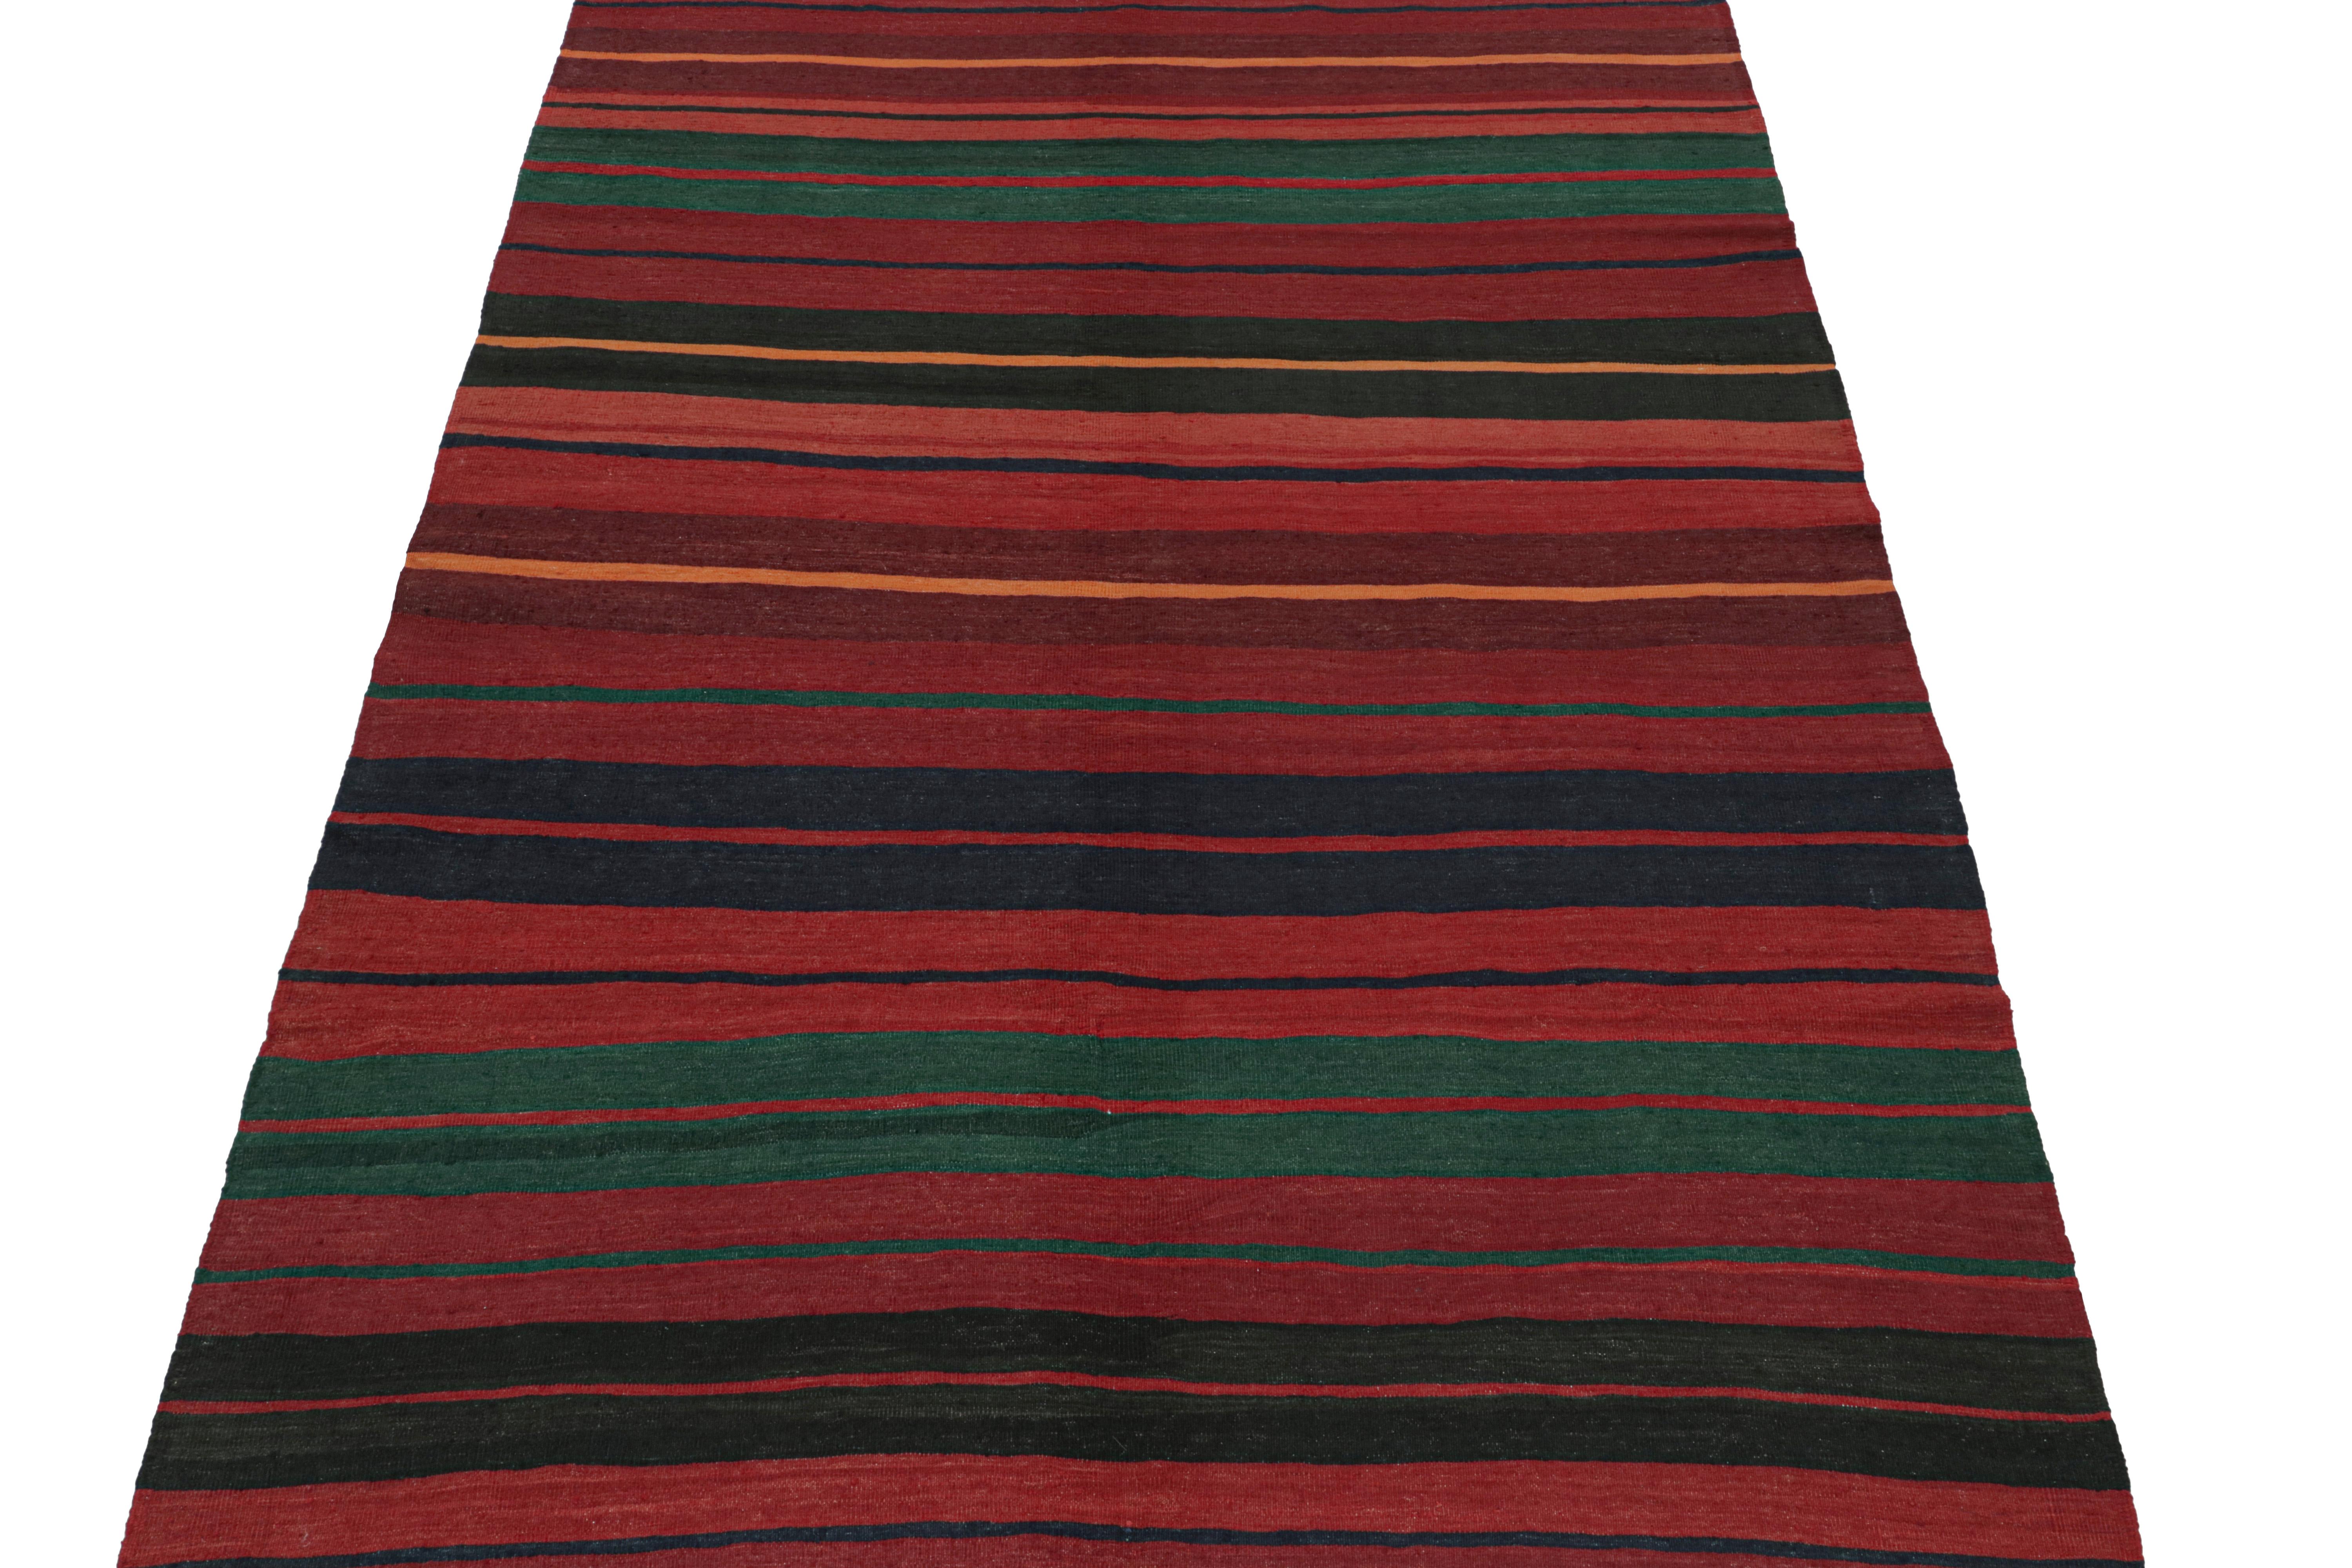 This vintage 7x11 Persian Kilim is believed to be a tribal rug of Karadagh—a mountainous region known for its Craft. Handwoven in wool, it originates, circa 1950-1960.

Its design enjoys a rich burgundy with teal, navy blue, black, and orange